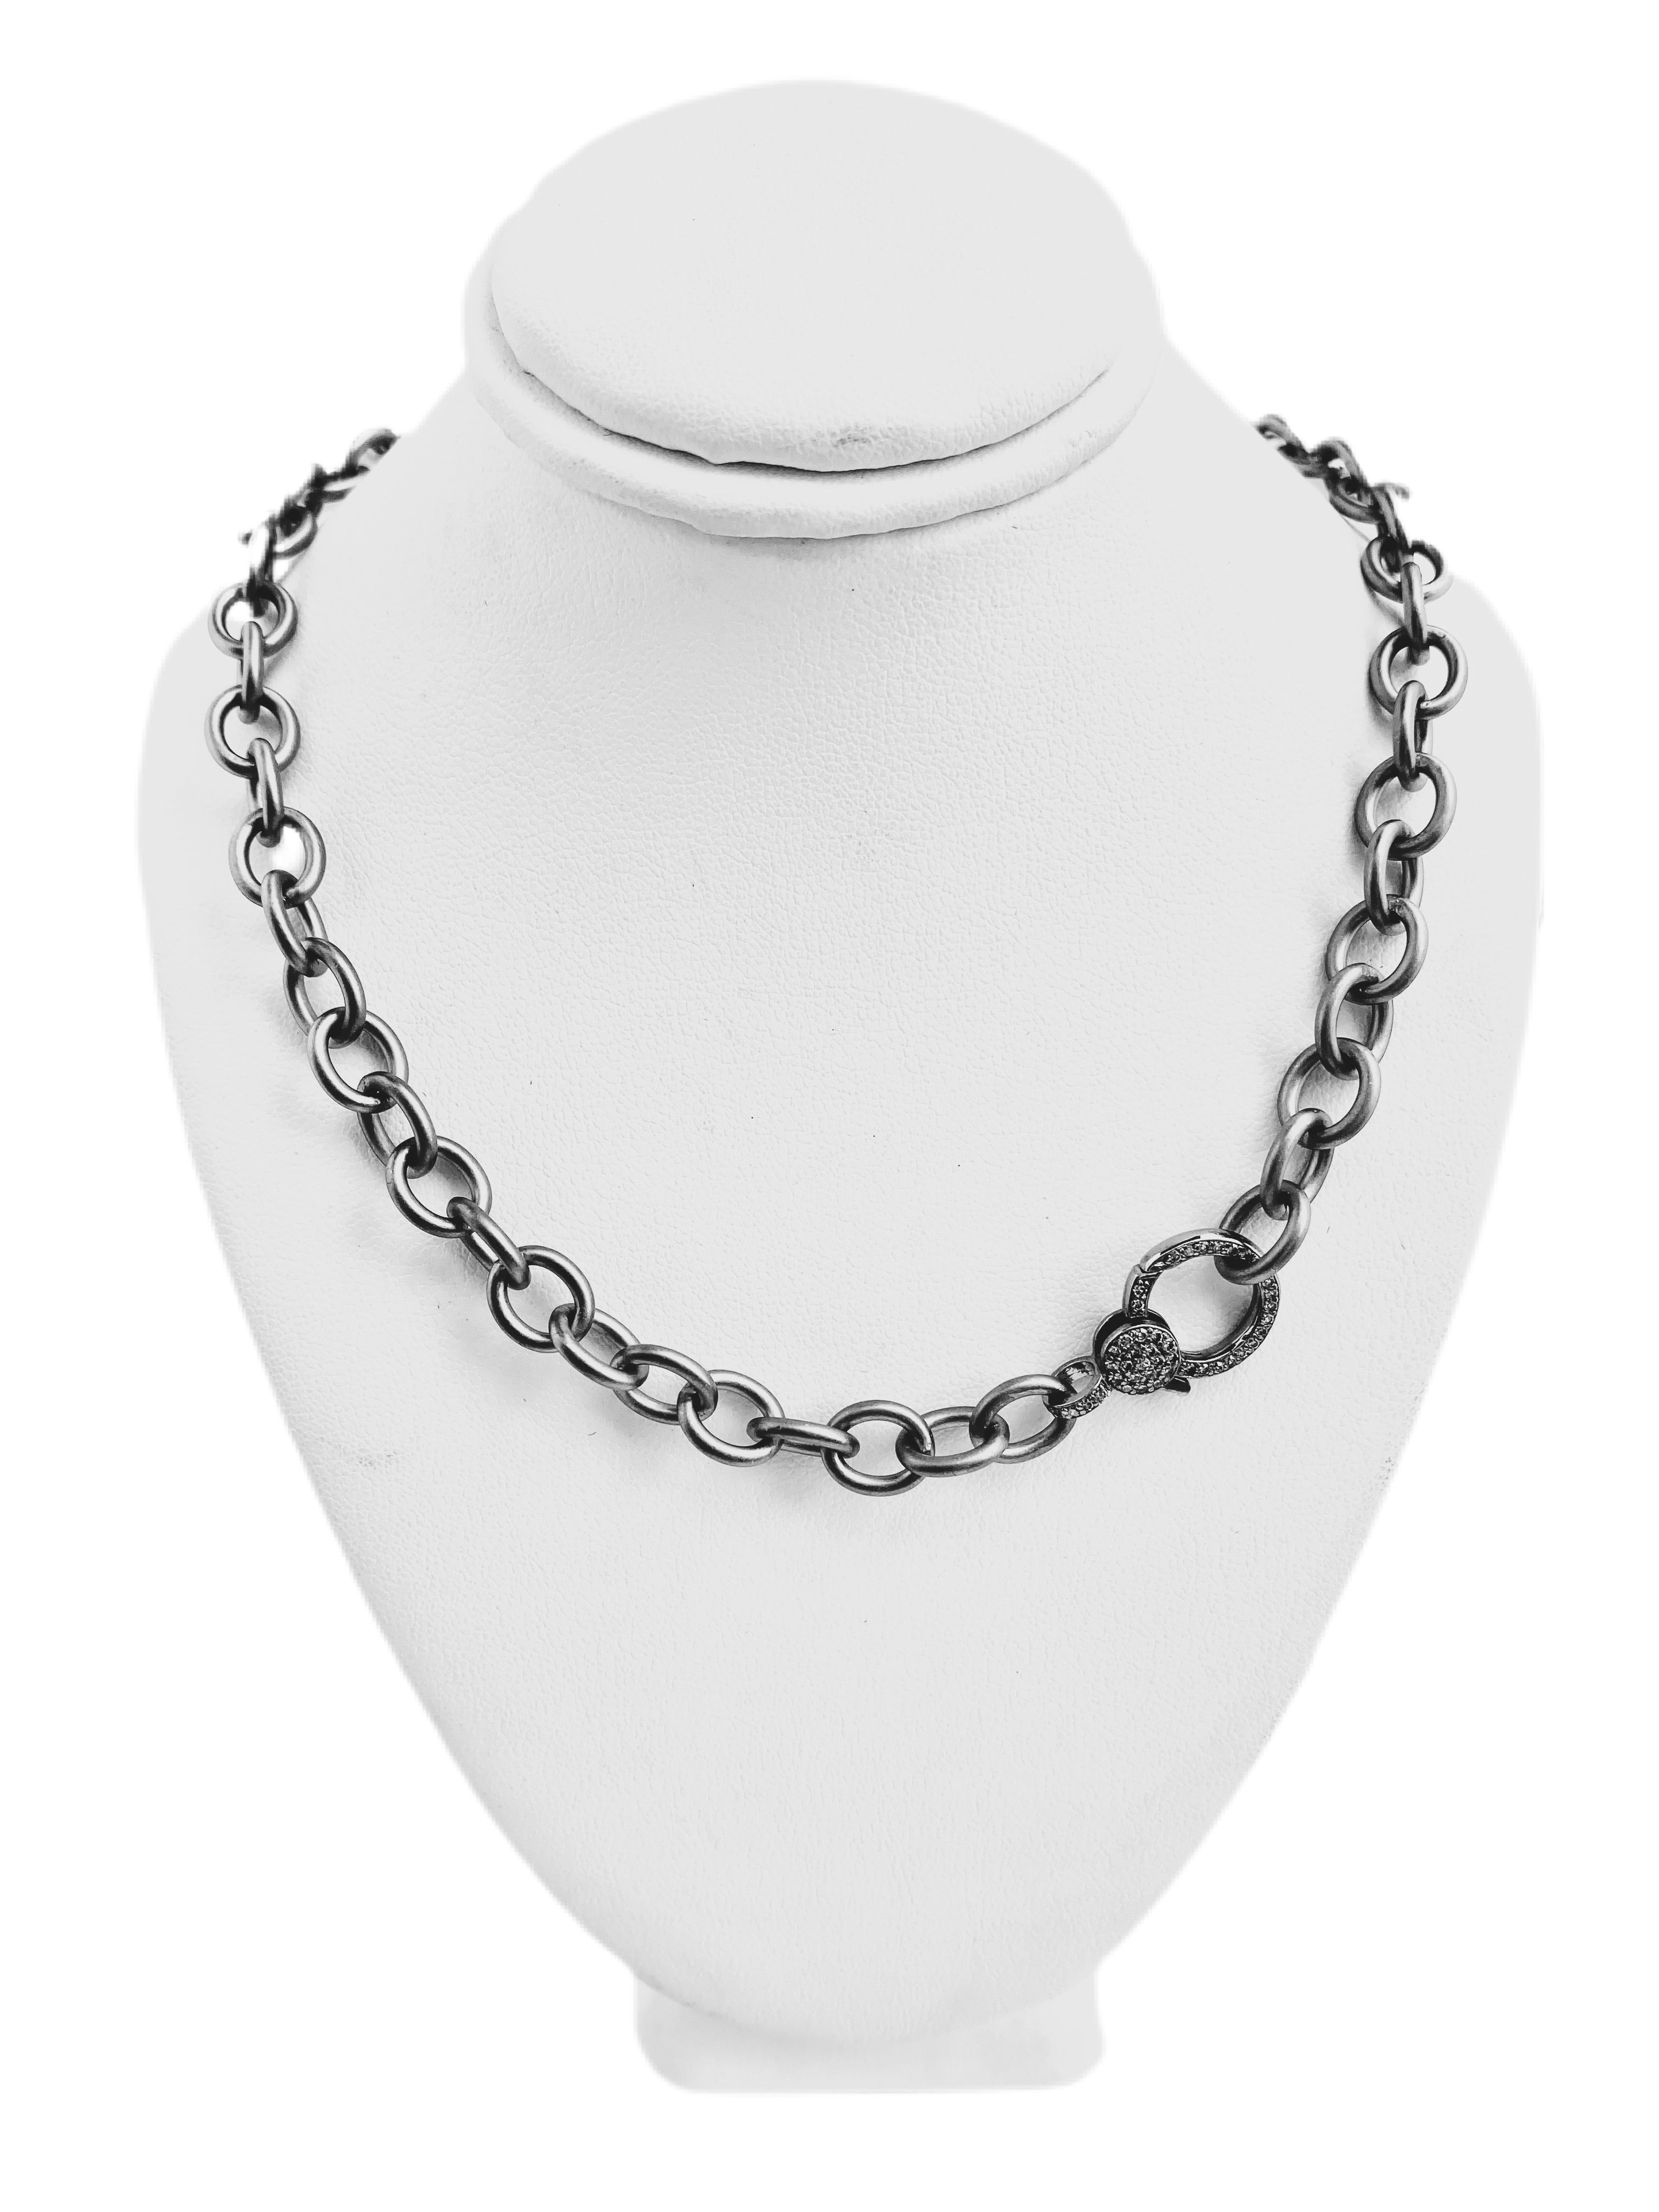 S.Row Designs 18” Sterling Silver Necklace with Diamond Clasp